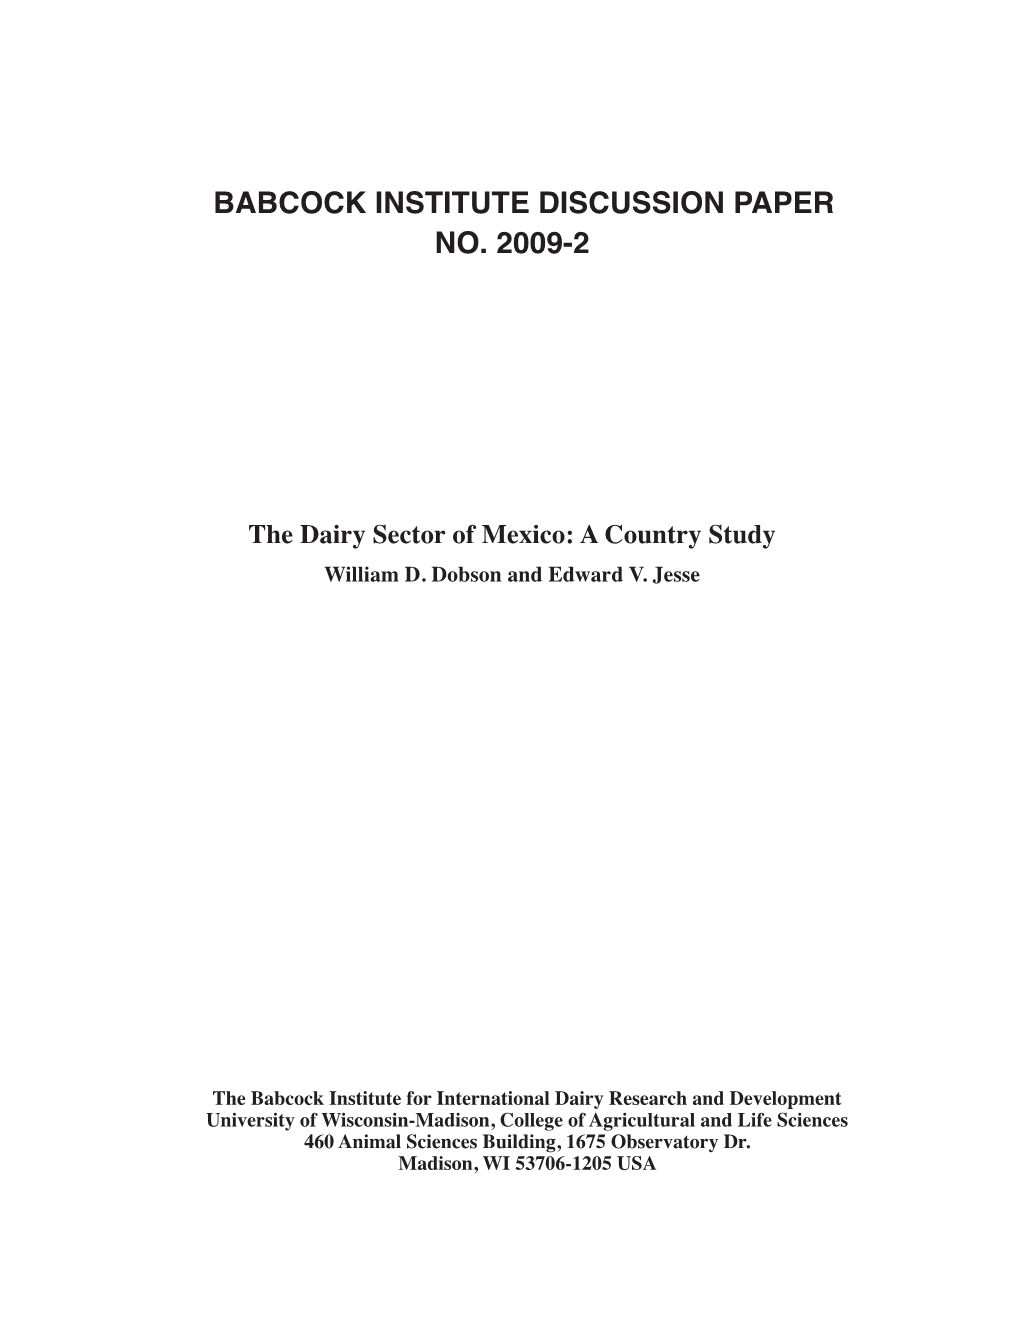 Babcock Institute Discussion Paper No. 2009-2 the Dairy Sector of Mexico: a Country Study